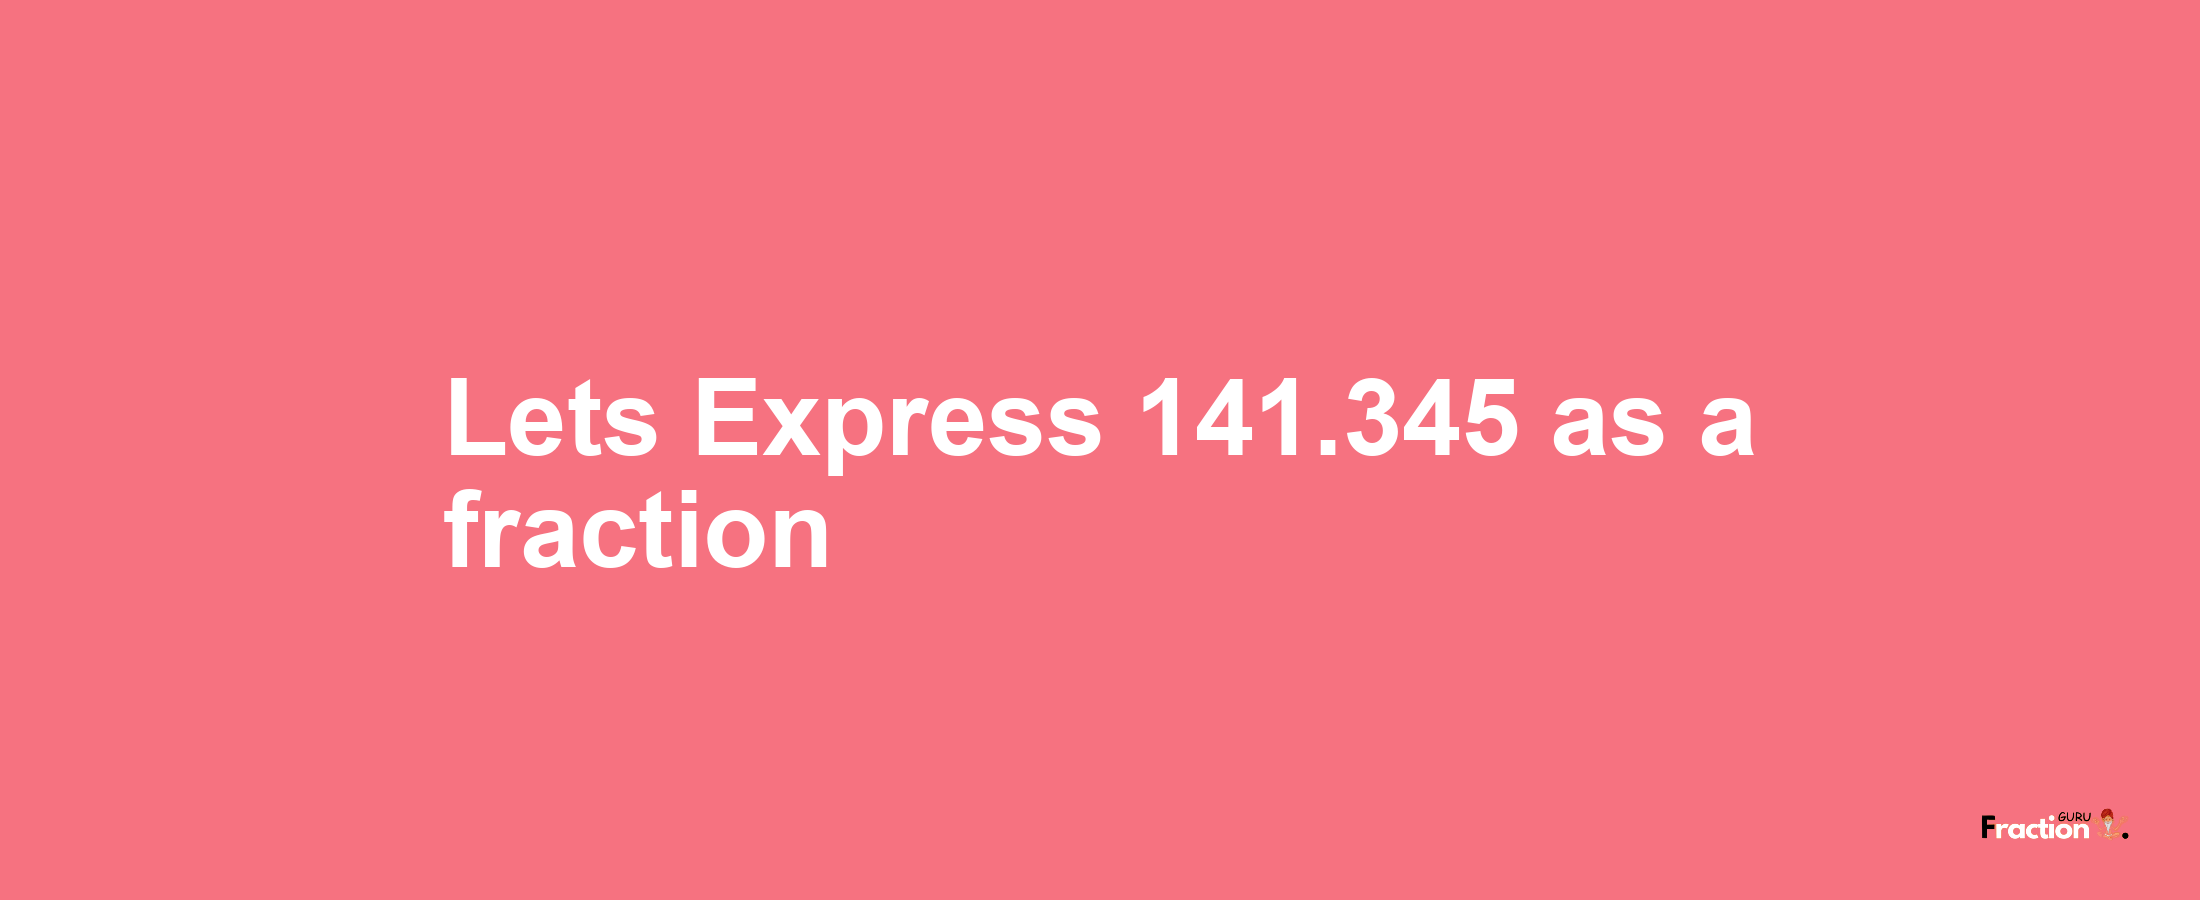 Lets Express 141.345 as afraction